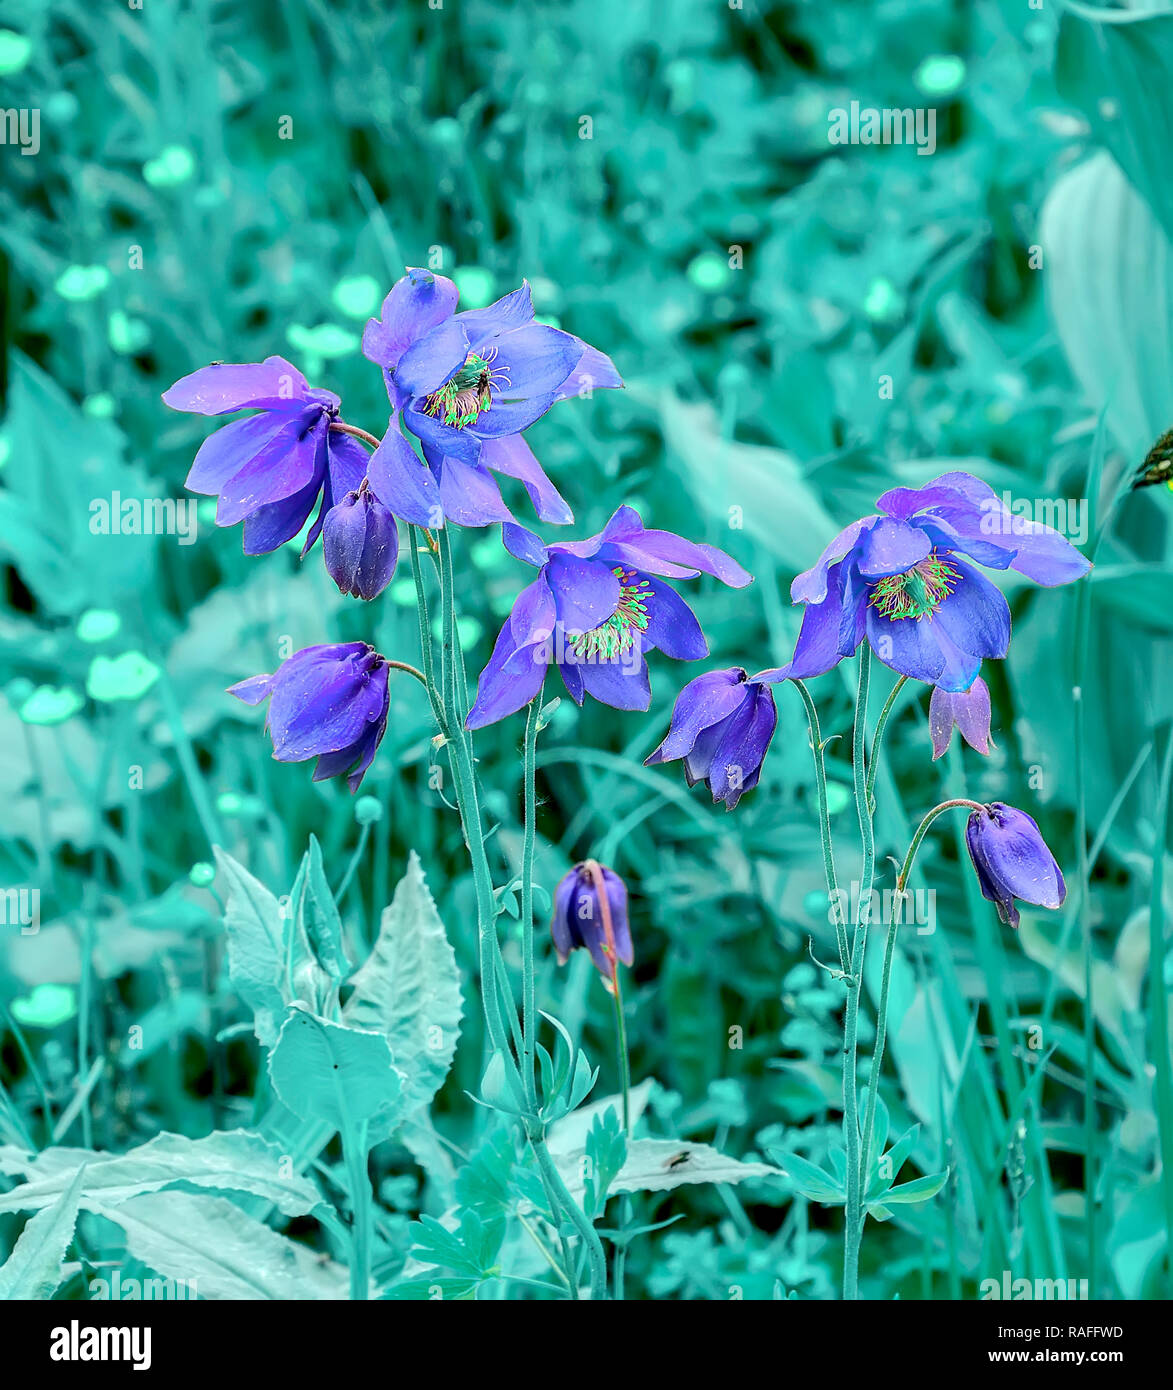 Beautiful blue wildflowers Aquilegia glandulosa close up, growing in alpine weadows of Altai mountains, Russia. Beauty of wild nature, toned image Stock Photo